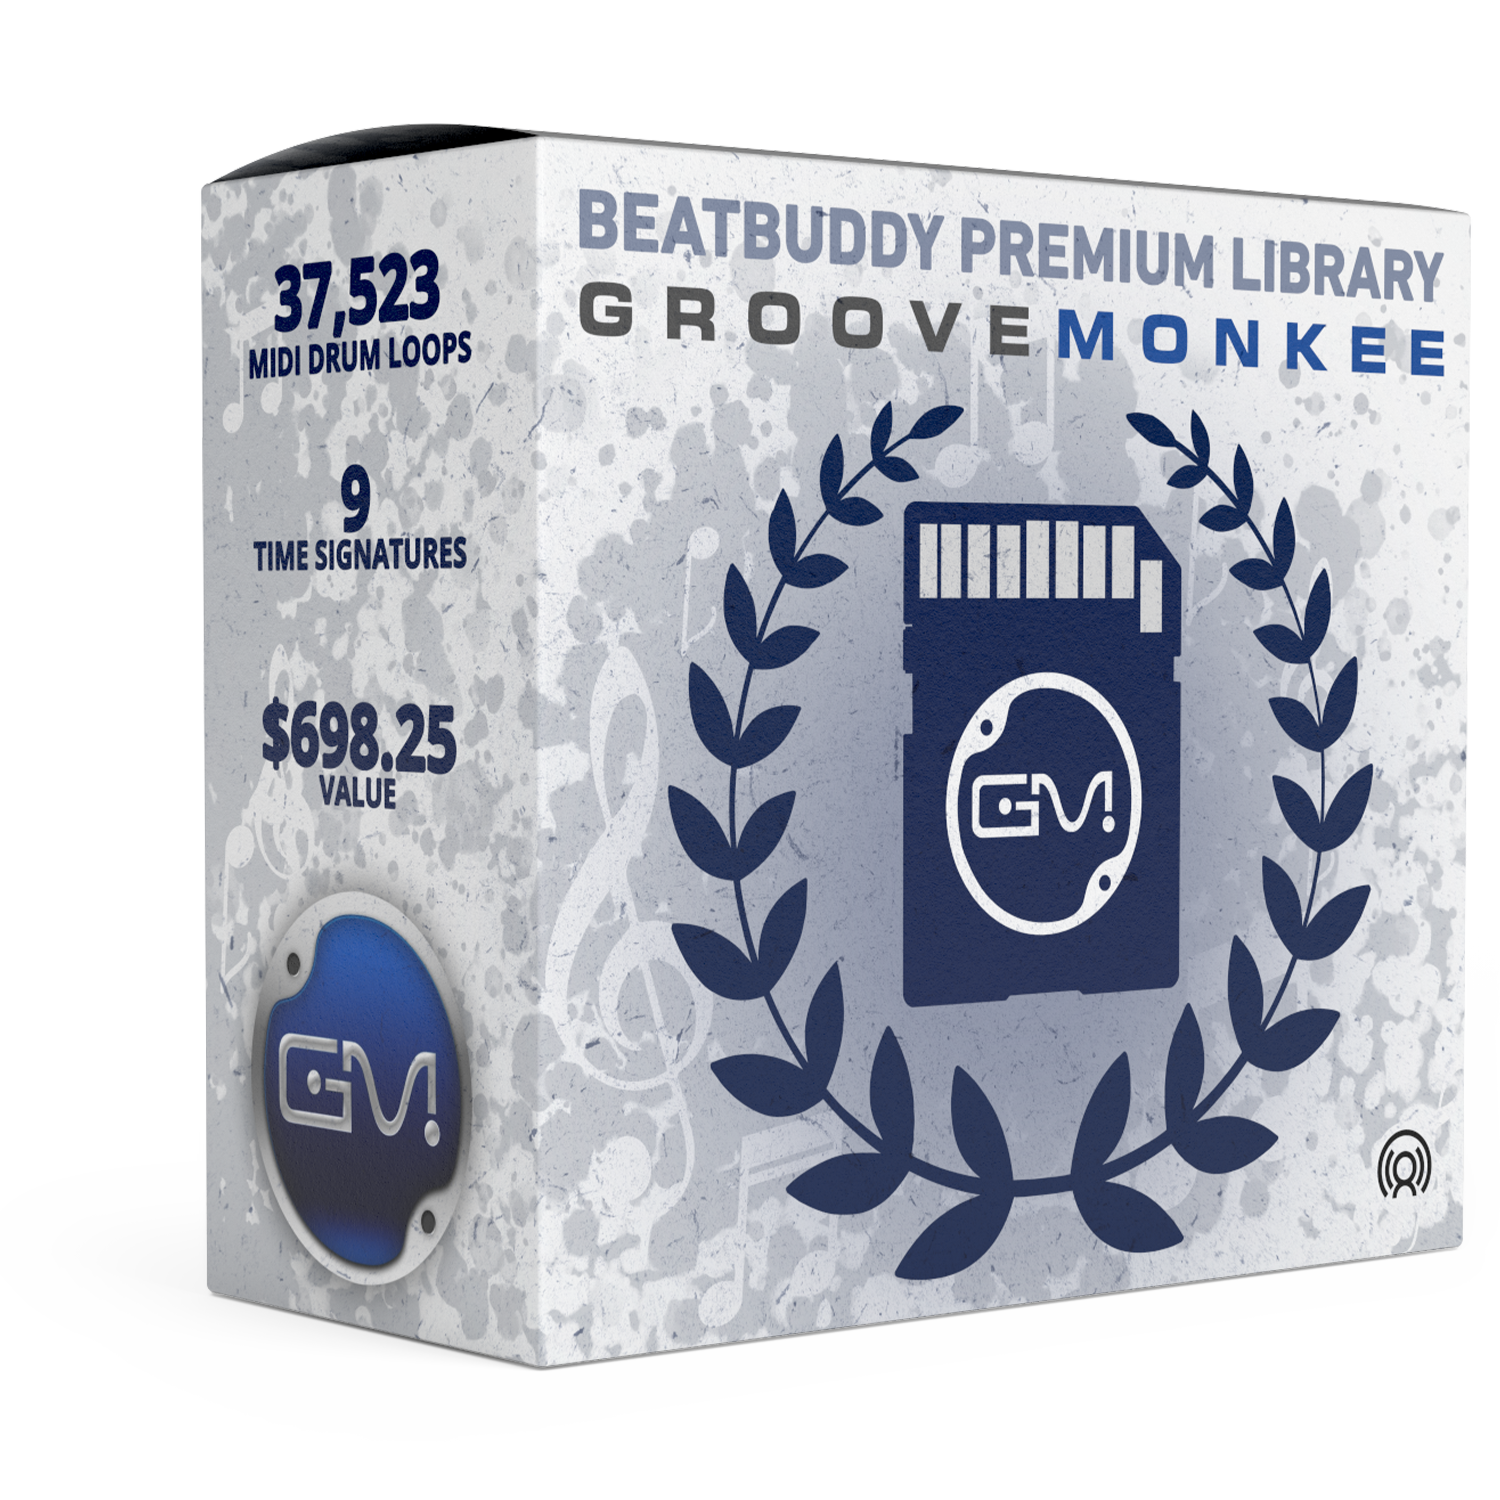 Premium Library SD Card: Groove Monkee